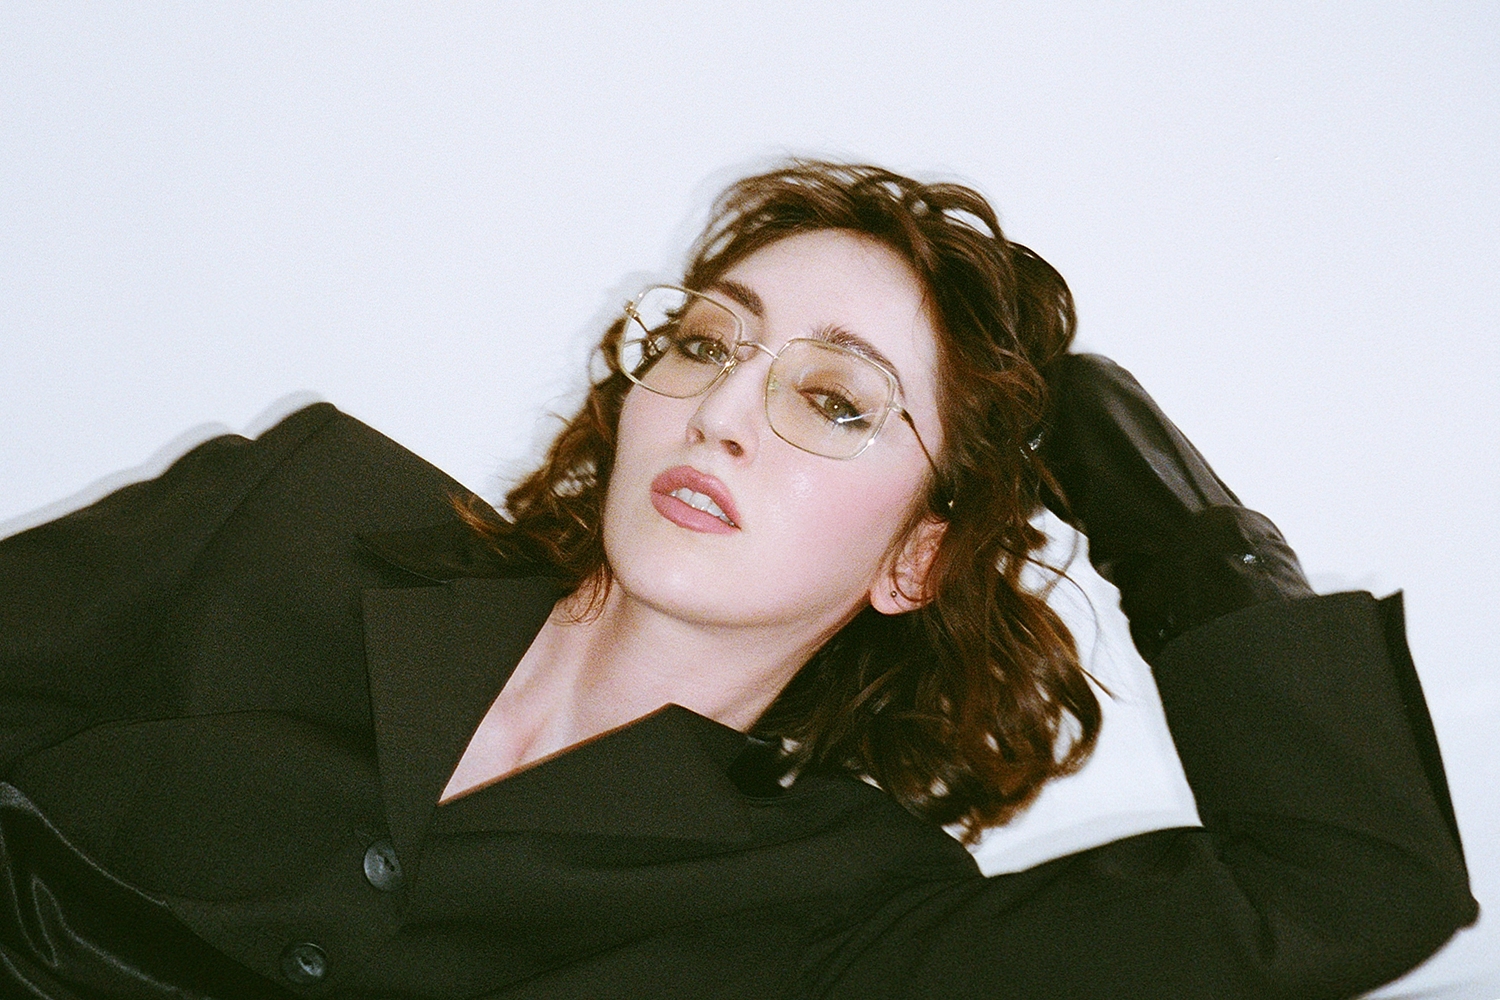 Jessica Winter teams up with Lynks for new track ‘Clutter’